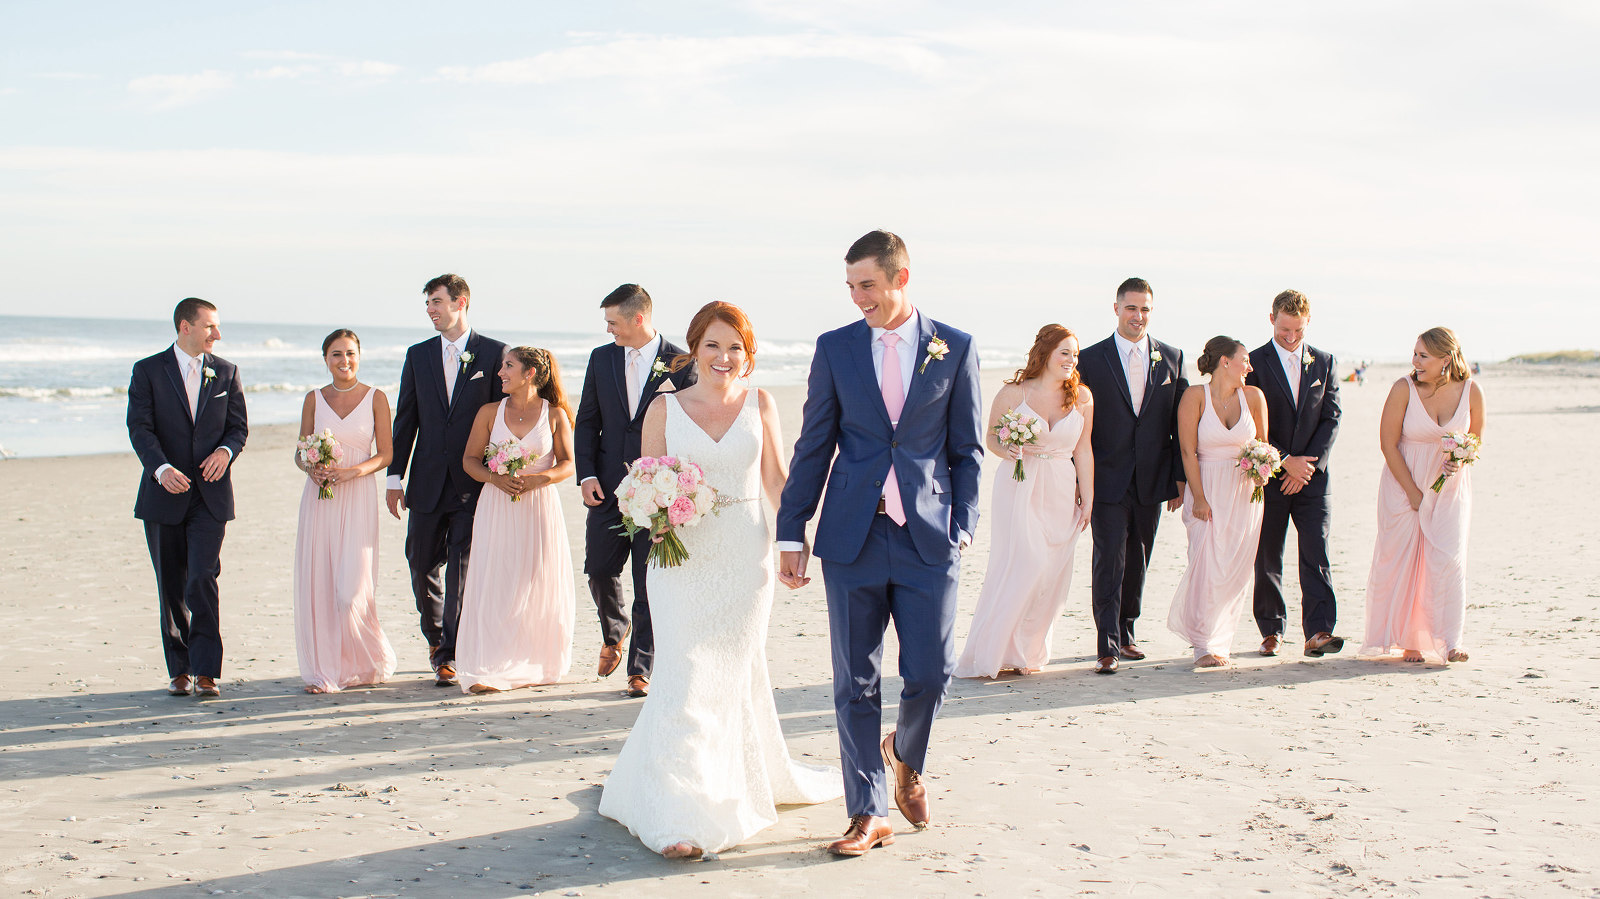 Bridal party on the beach at the Jersey Shore - Photography by Susan Hennessey Photography, a South Jersey wedding photographer